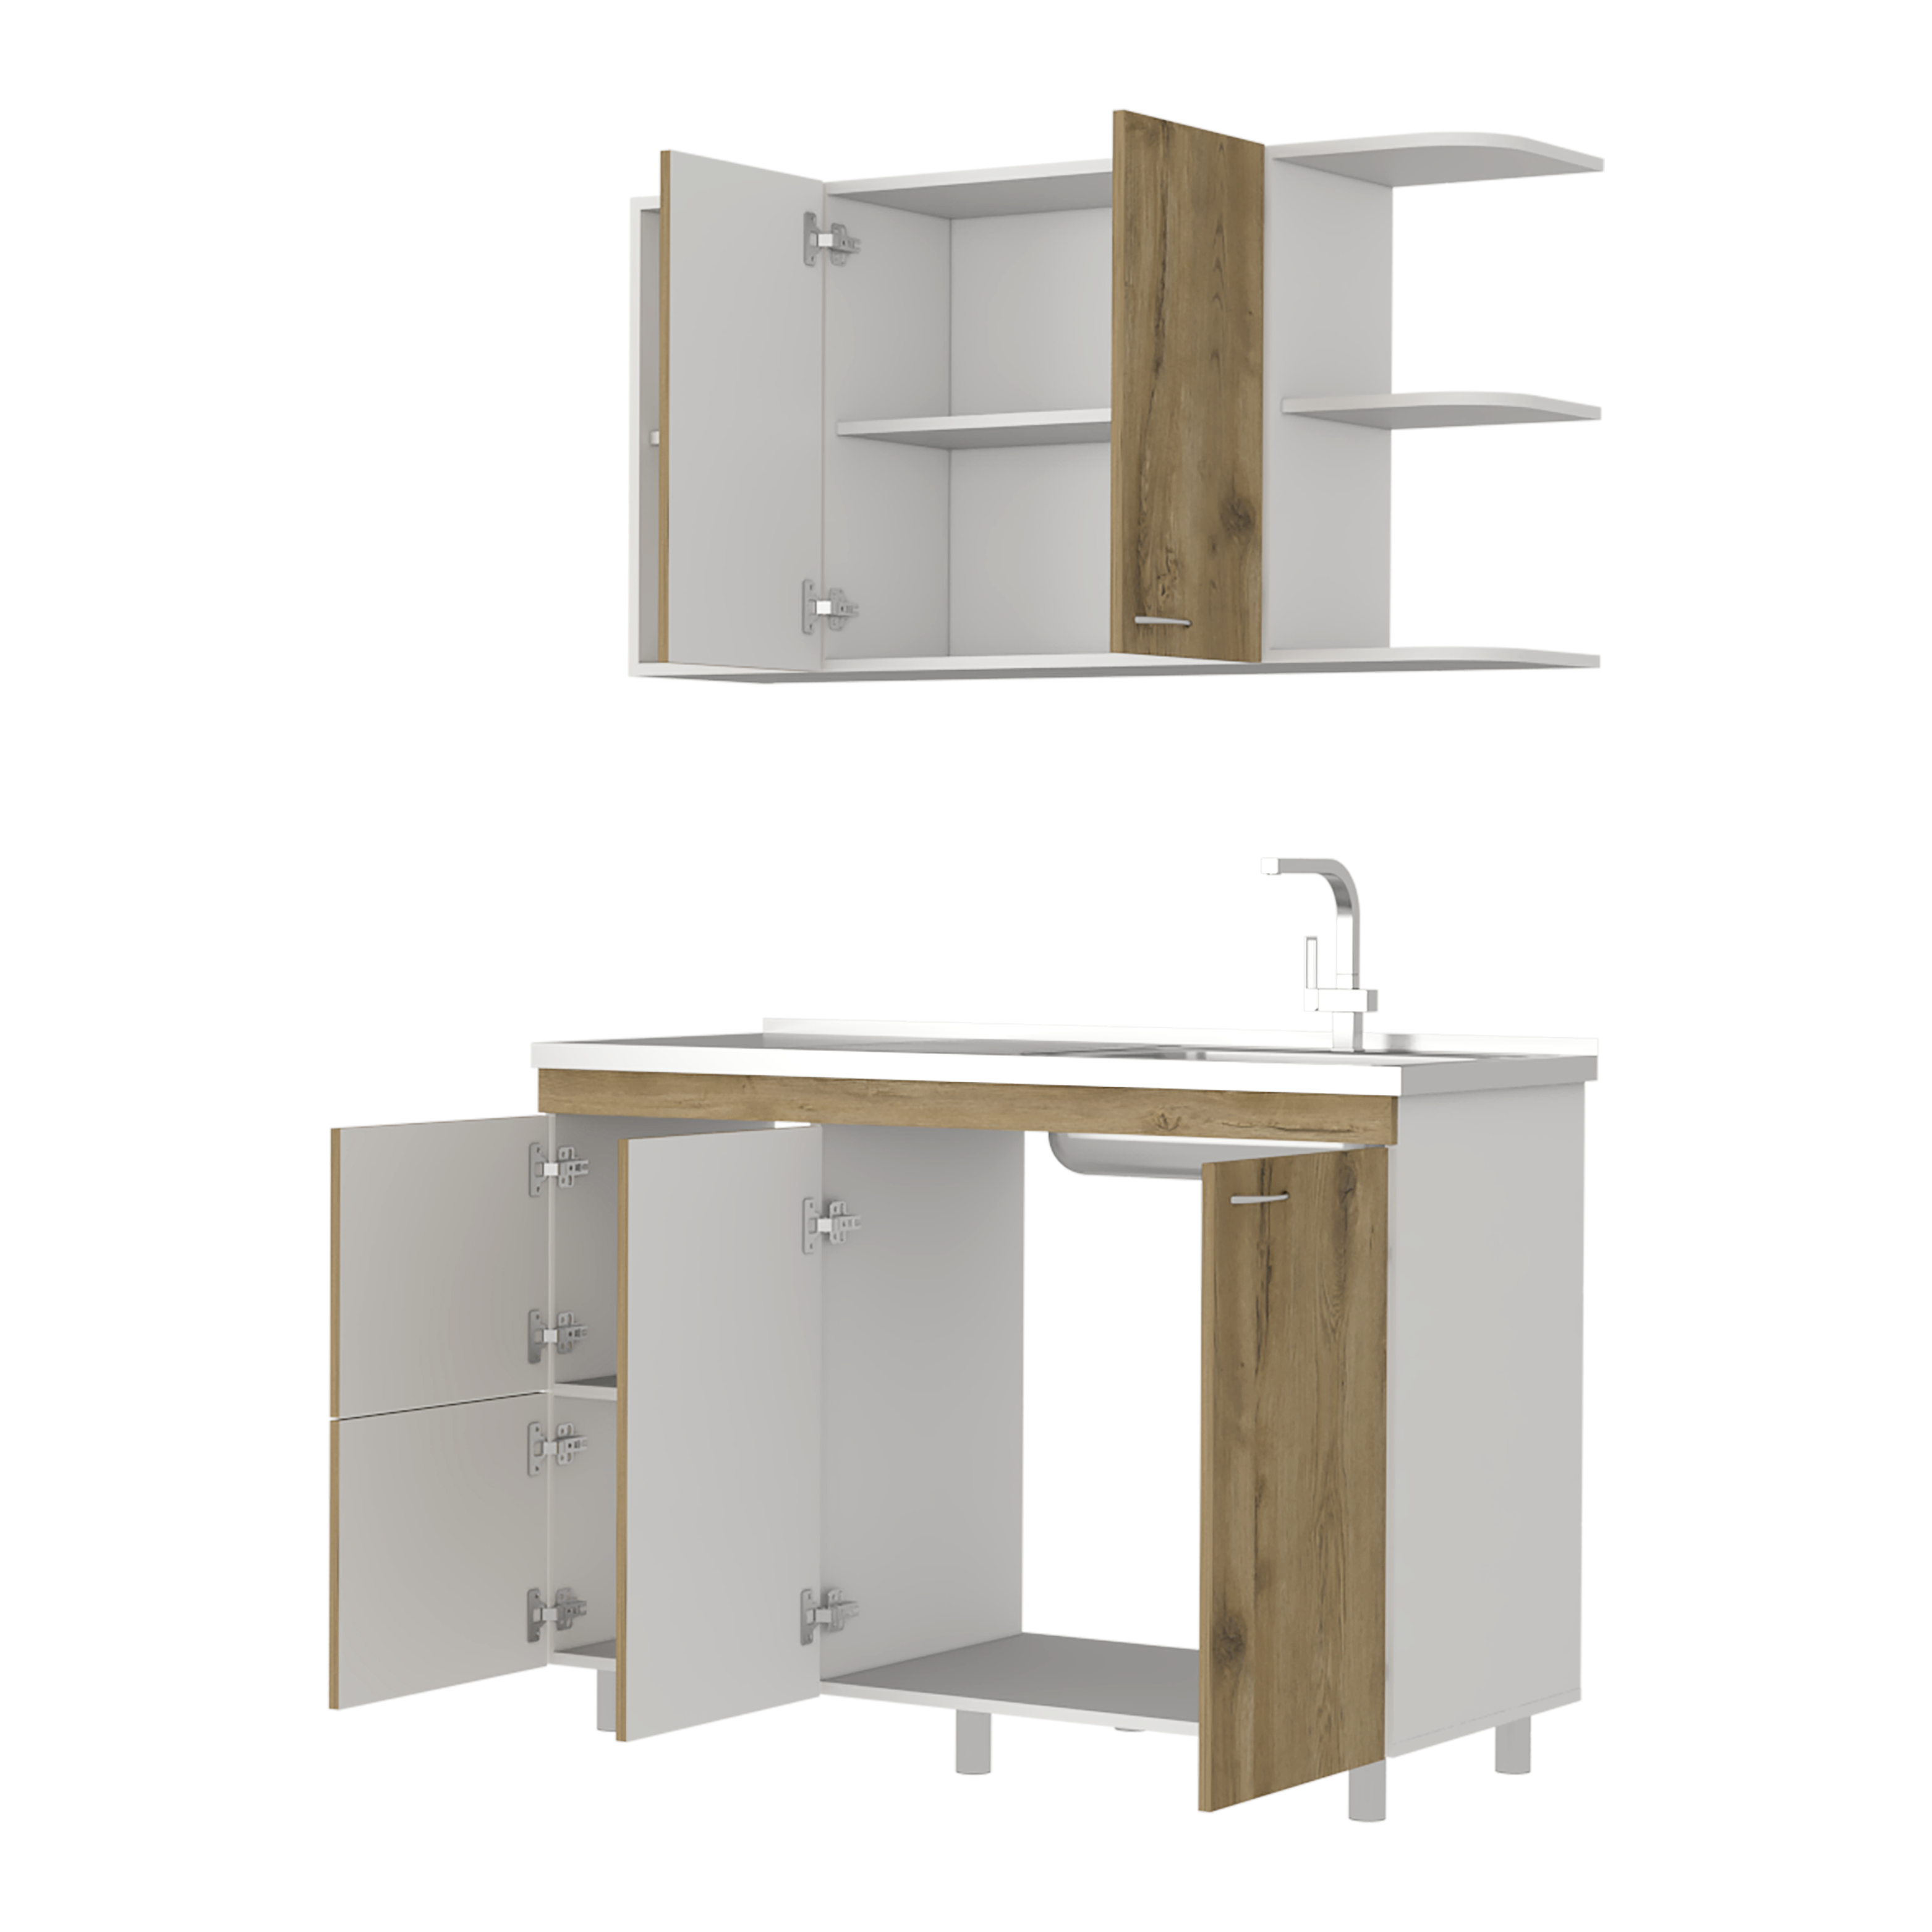 Elica Integral Kitchen Includes Meson To The Left